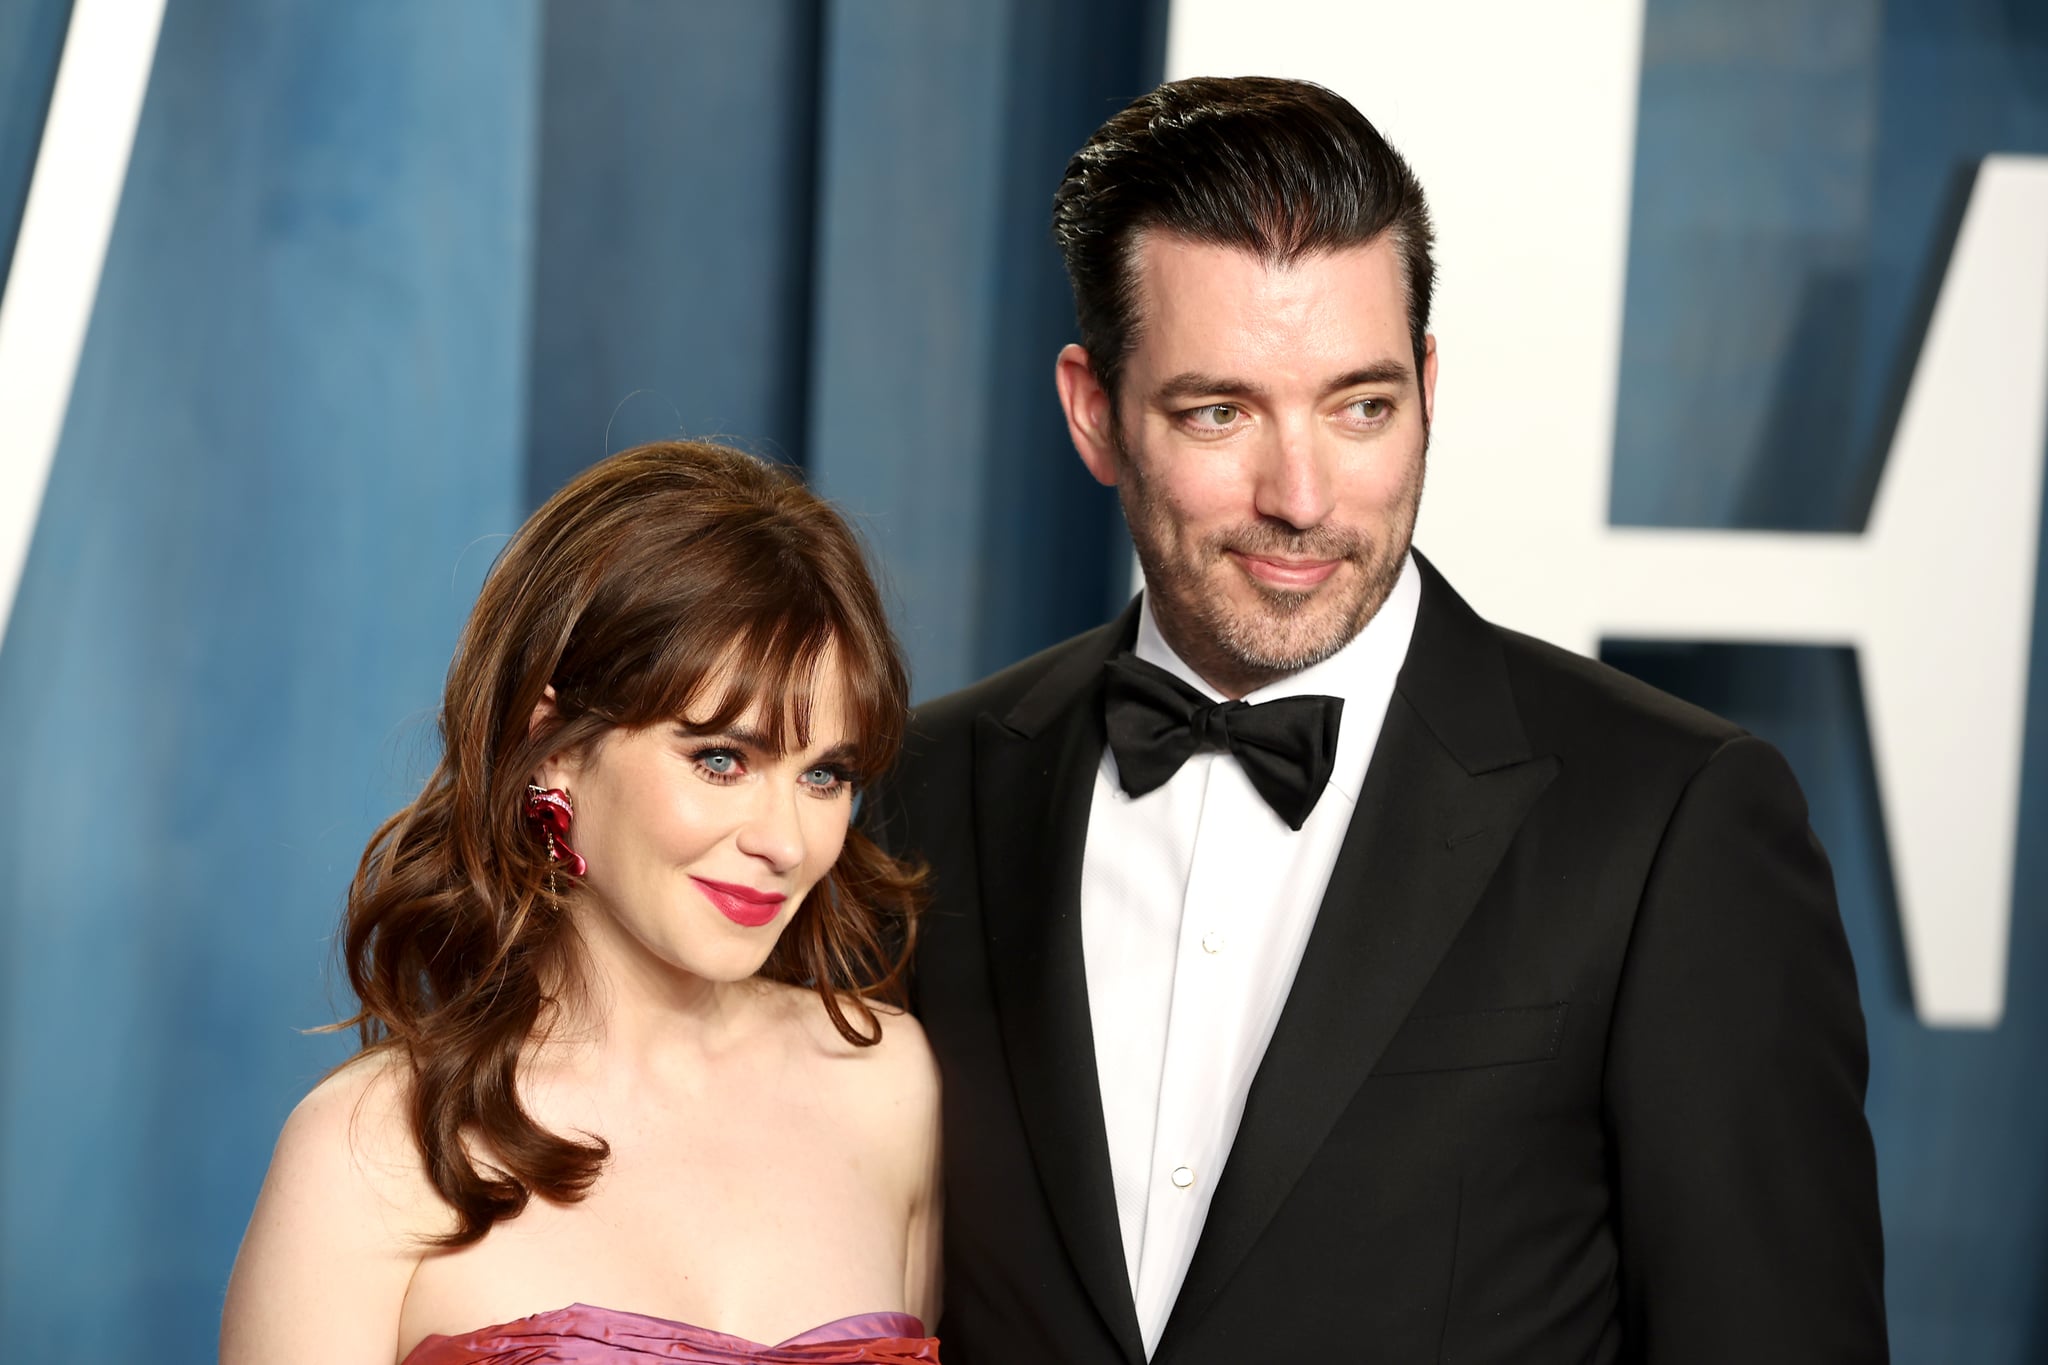 BEVERLY HILLS, CALIFORNIA - MARCH 27: (L-R) Zooey Deschanel and Jonathan Scott attend the 2022 Vanity Fair Oscar Party Hosted By Radhika Jones at Wallis Annenberg Centre for the Performing Arts on March 27, 2022 in Beverly Hills, California. (Photo by Arturo Holmes/FilmMagic)